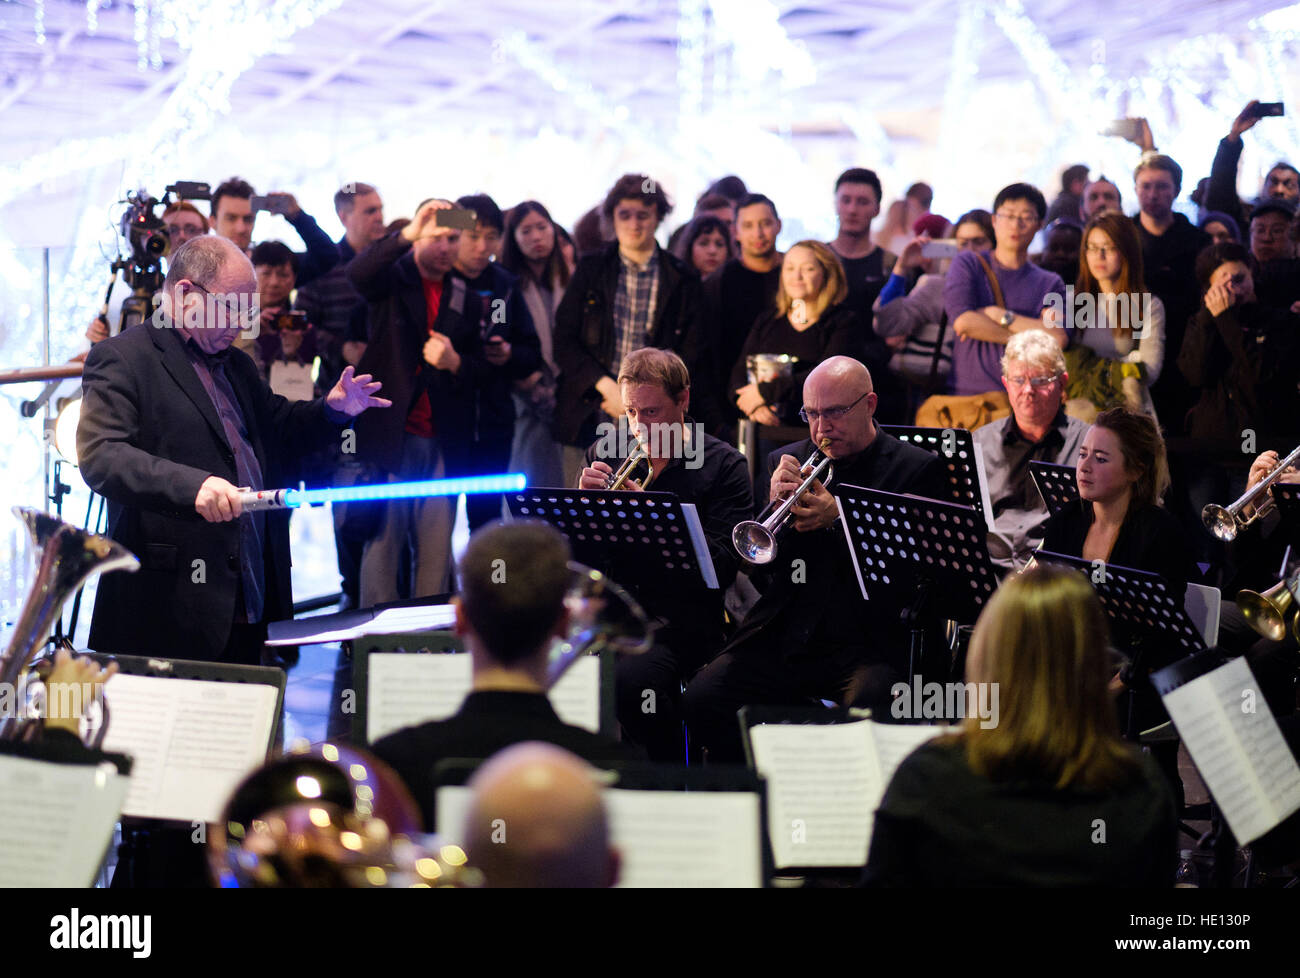 Fans attending Vue at Westfield White City are treated to a live performance of John Williams' iconic score from 'Star Wars' performed by the Symphonic Brass of London to celebrate the nationwide release of 'Rogue One: A Star Wars Story' in cinemas. Stock Photo